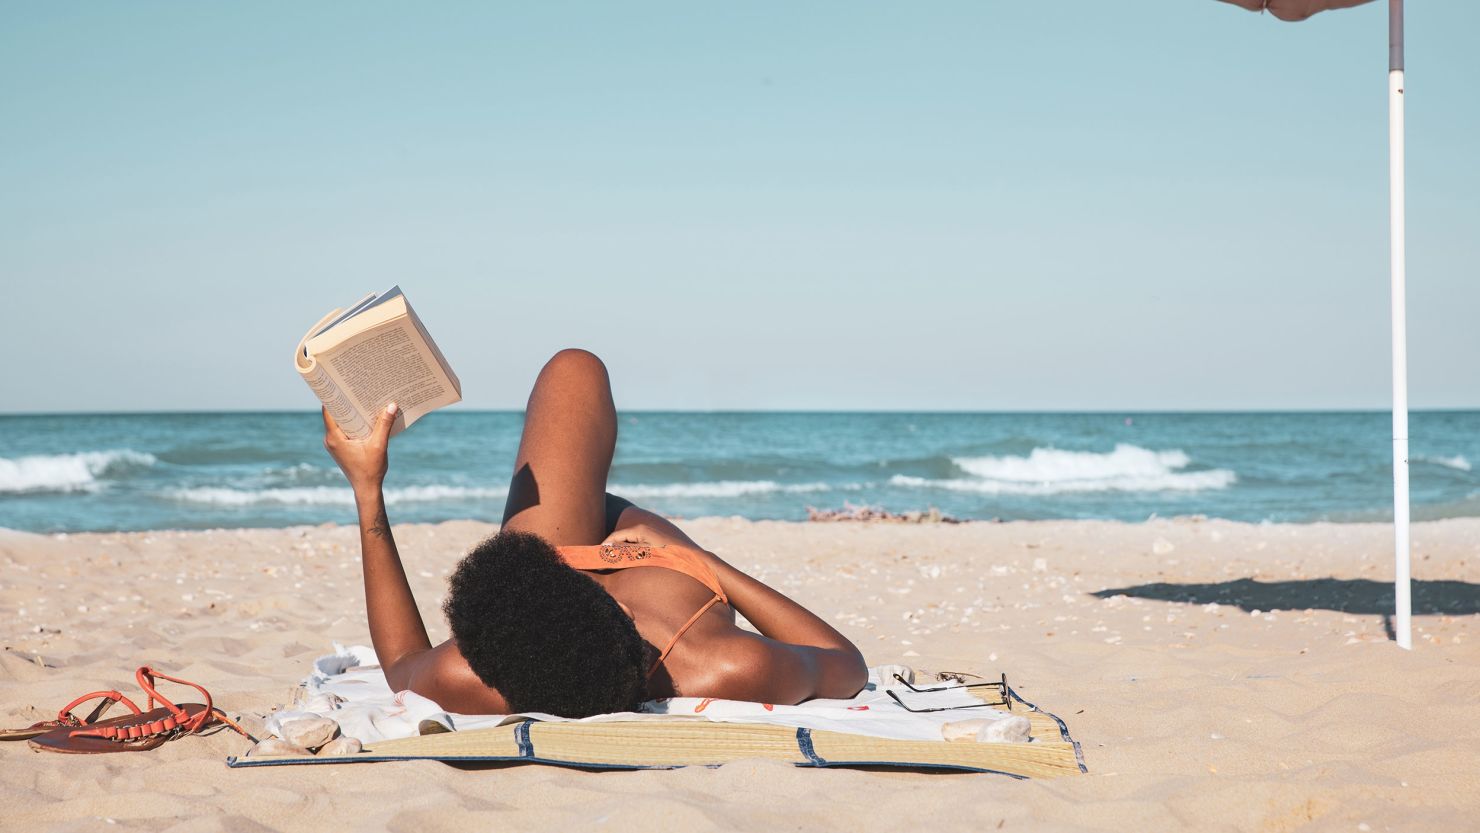 Though the "beach read" designation often comes with commercial success, it's also a loaded term.